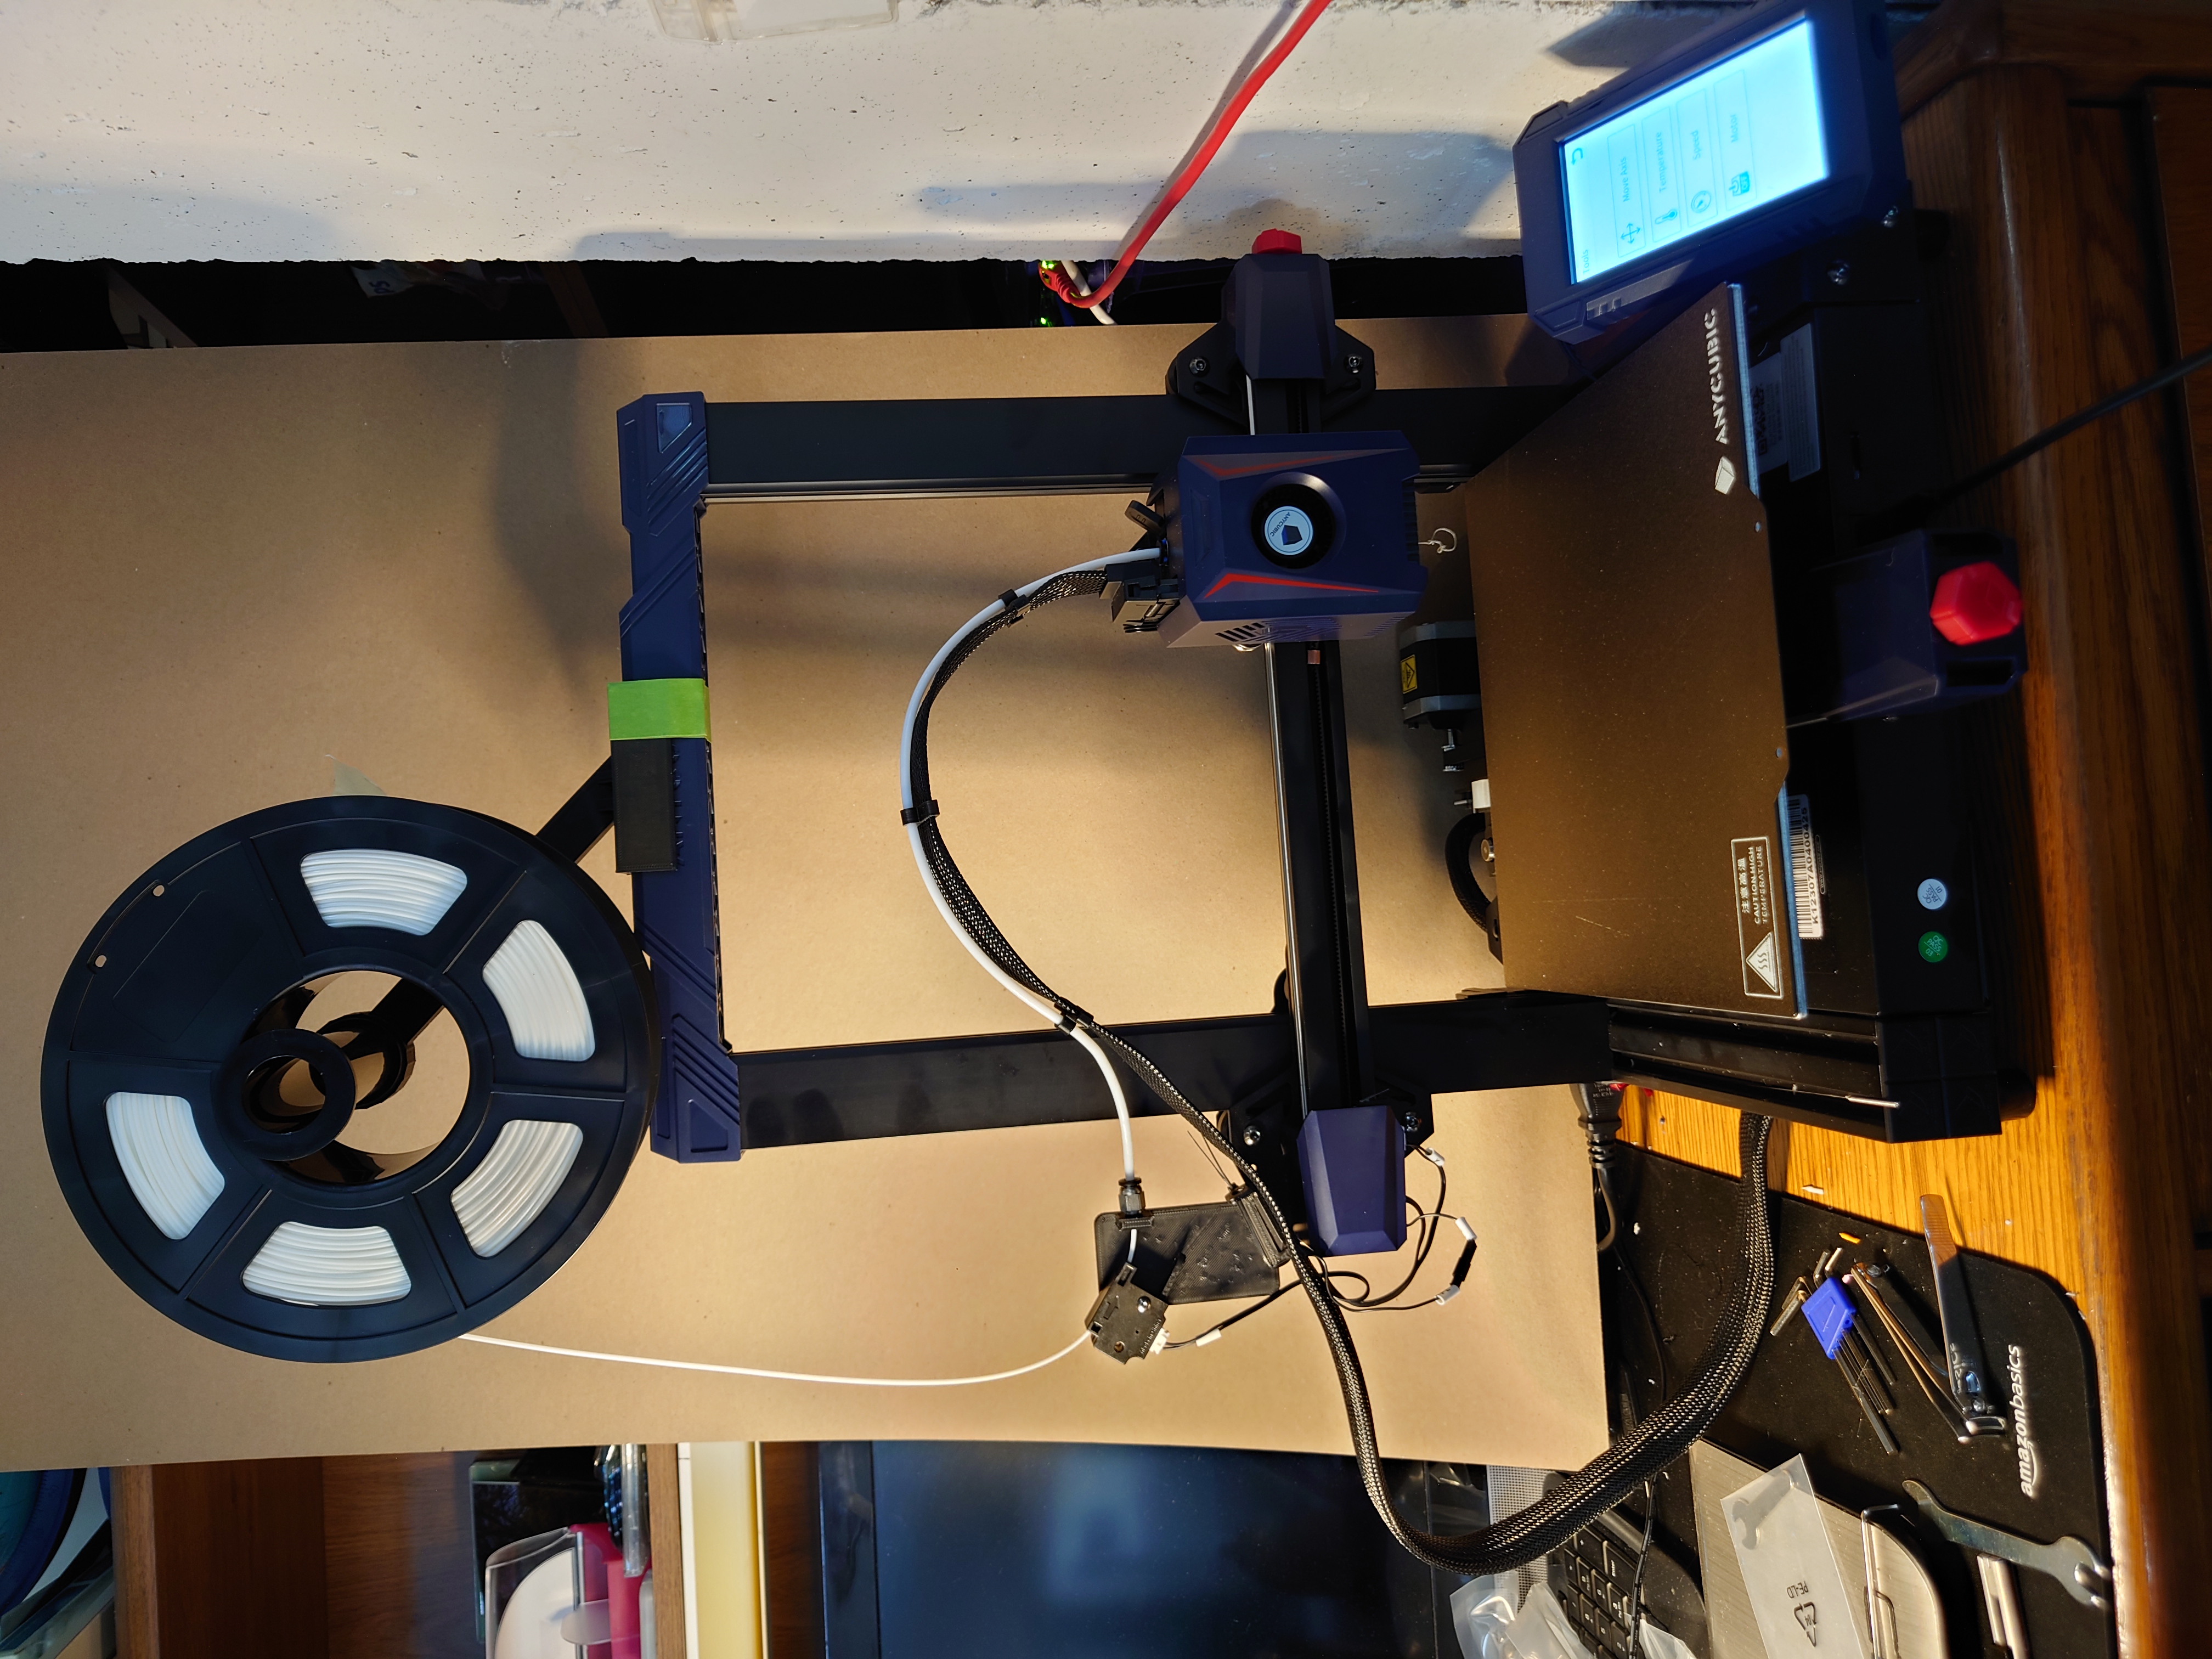 Hands On with the Anycubic Kobra Desktop 3D Printer, Part 2 « Fabbaloo